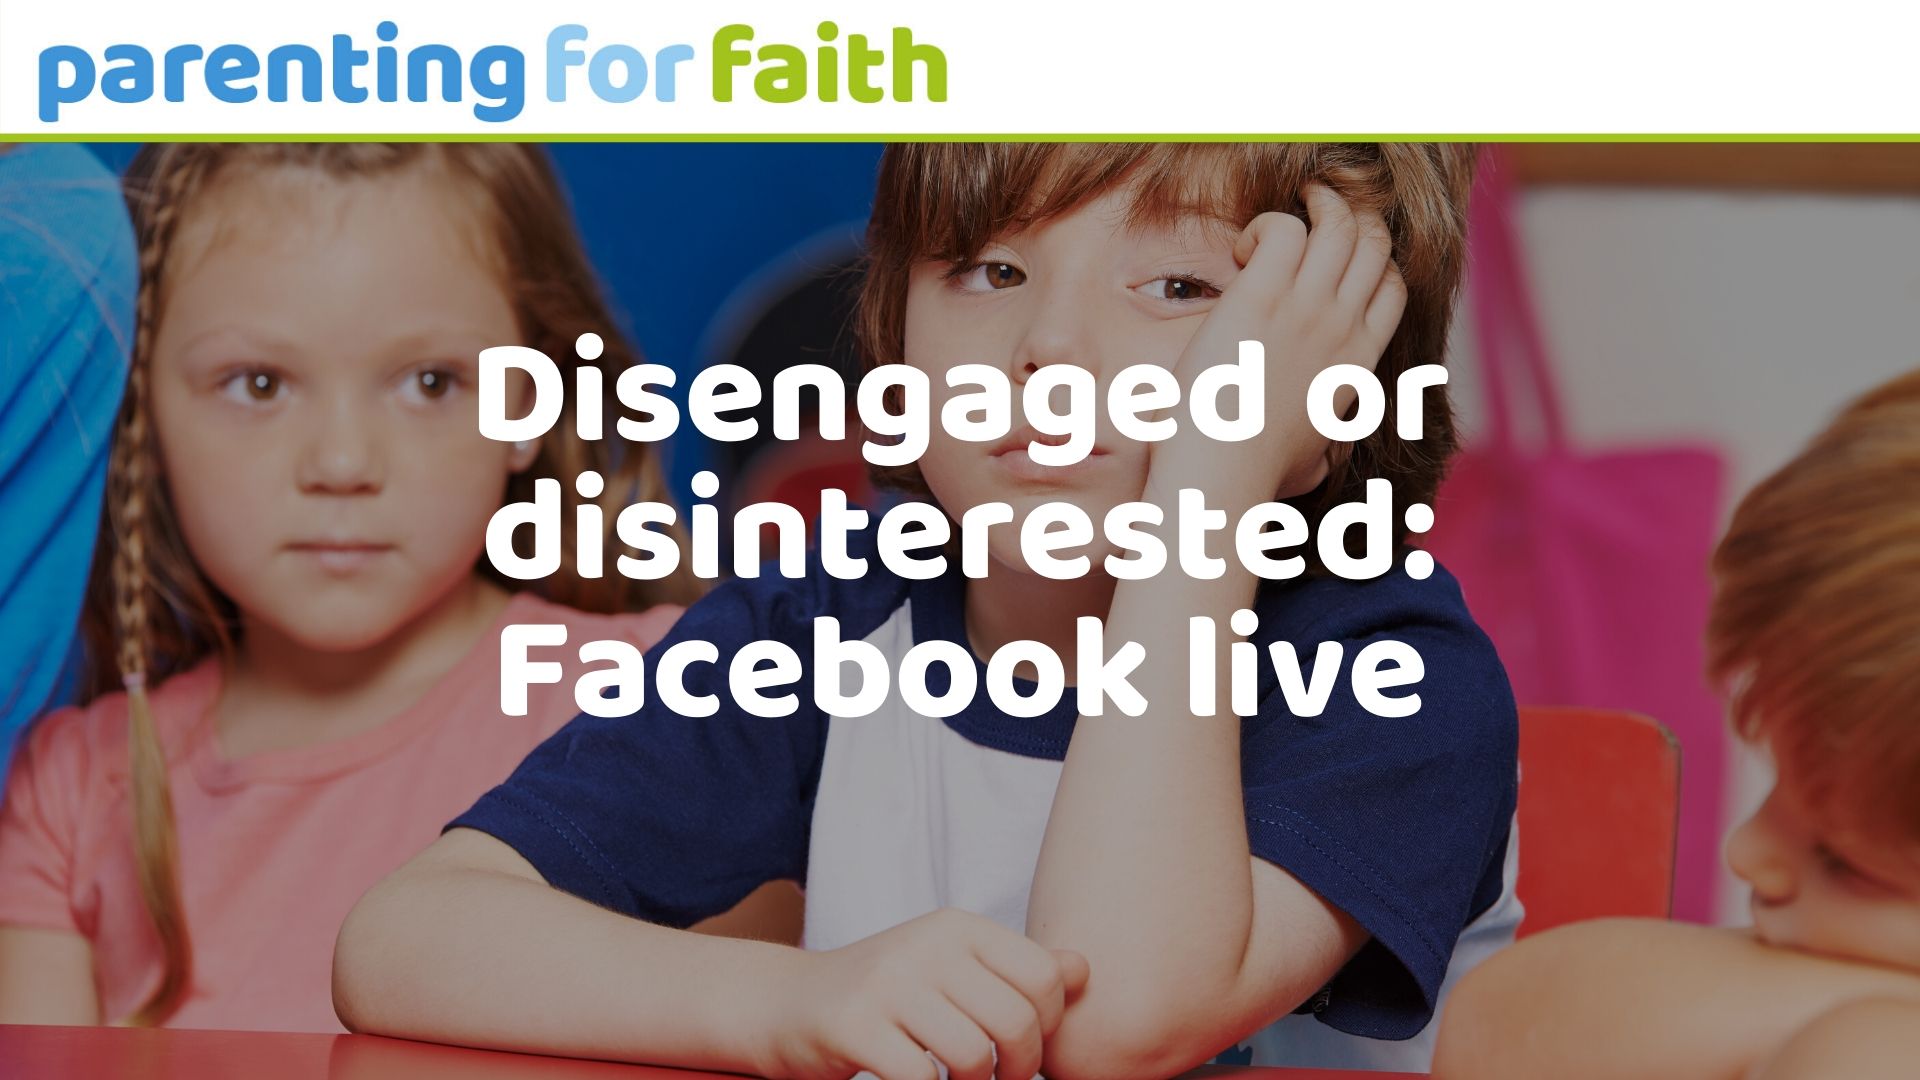 disengaged or disinterested facebook liveOG image 1920 x 1080px 2